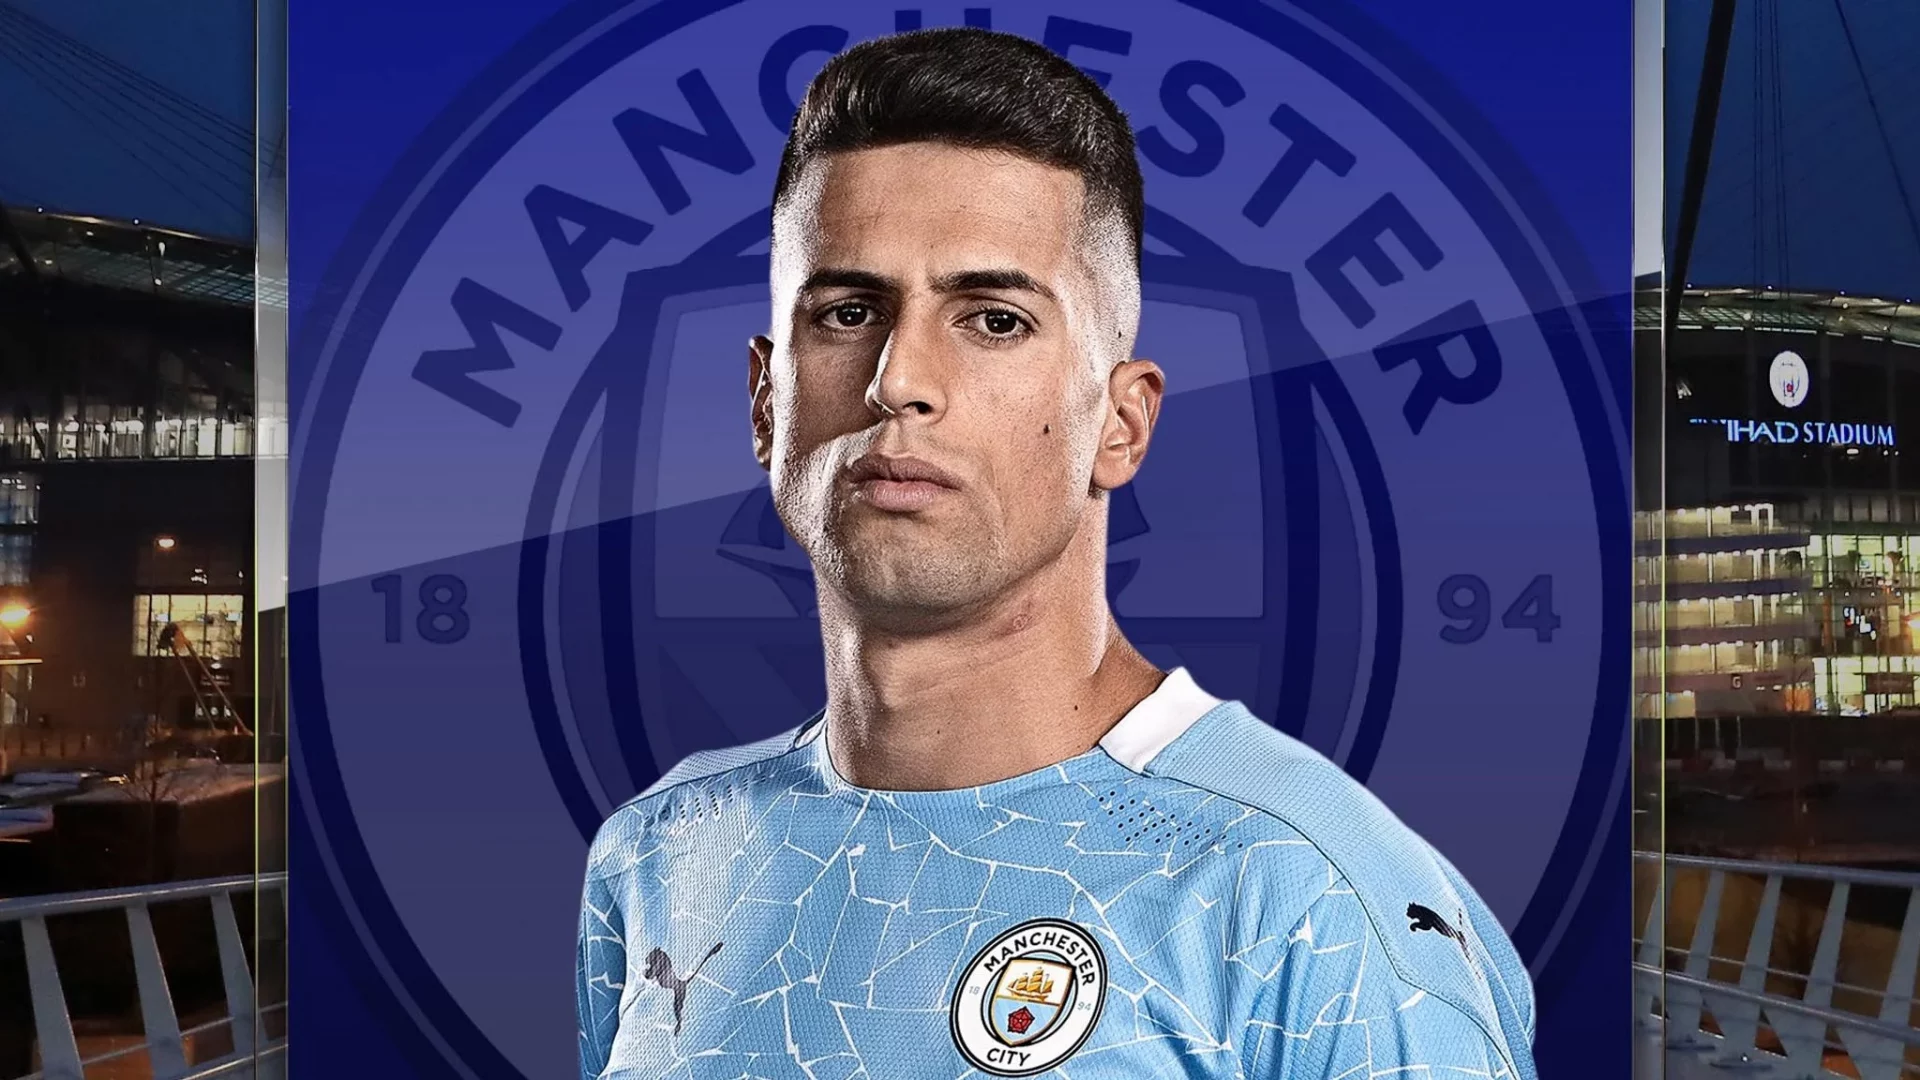 Joao Cancelo of Manchester City was not signed by Manchester United